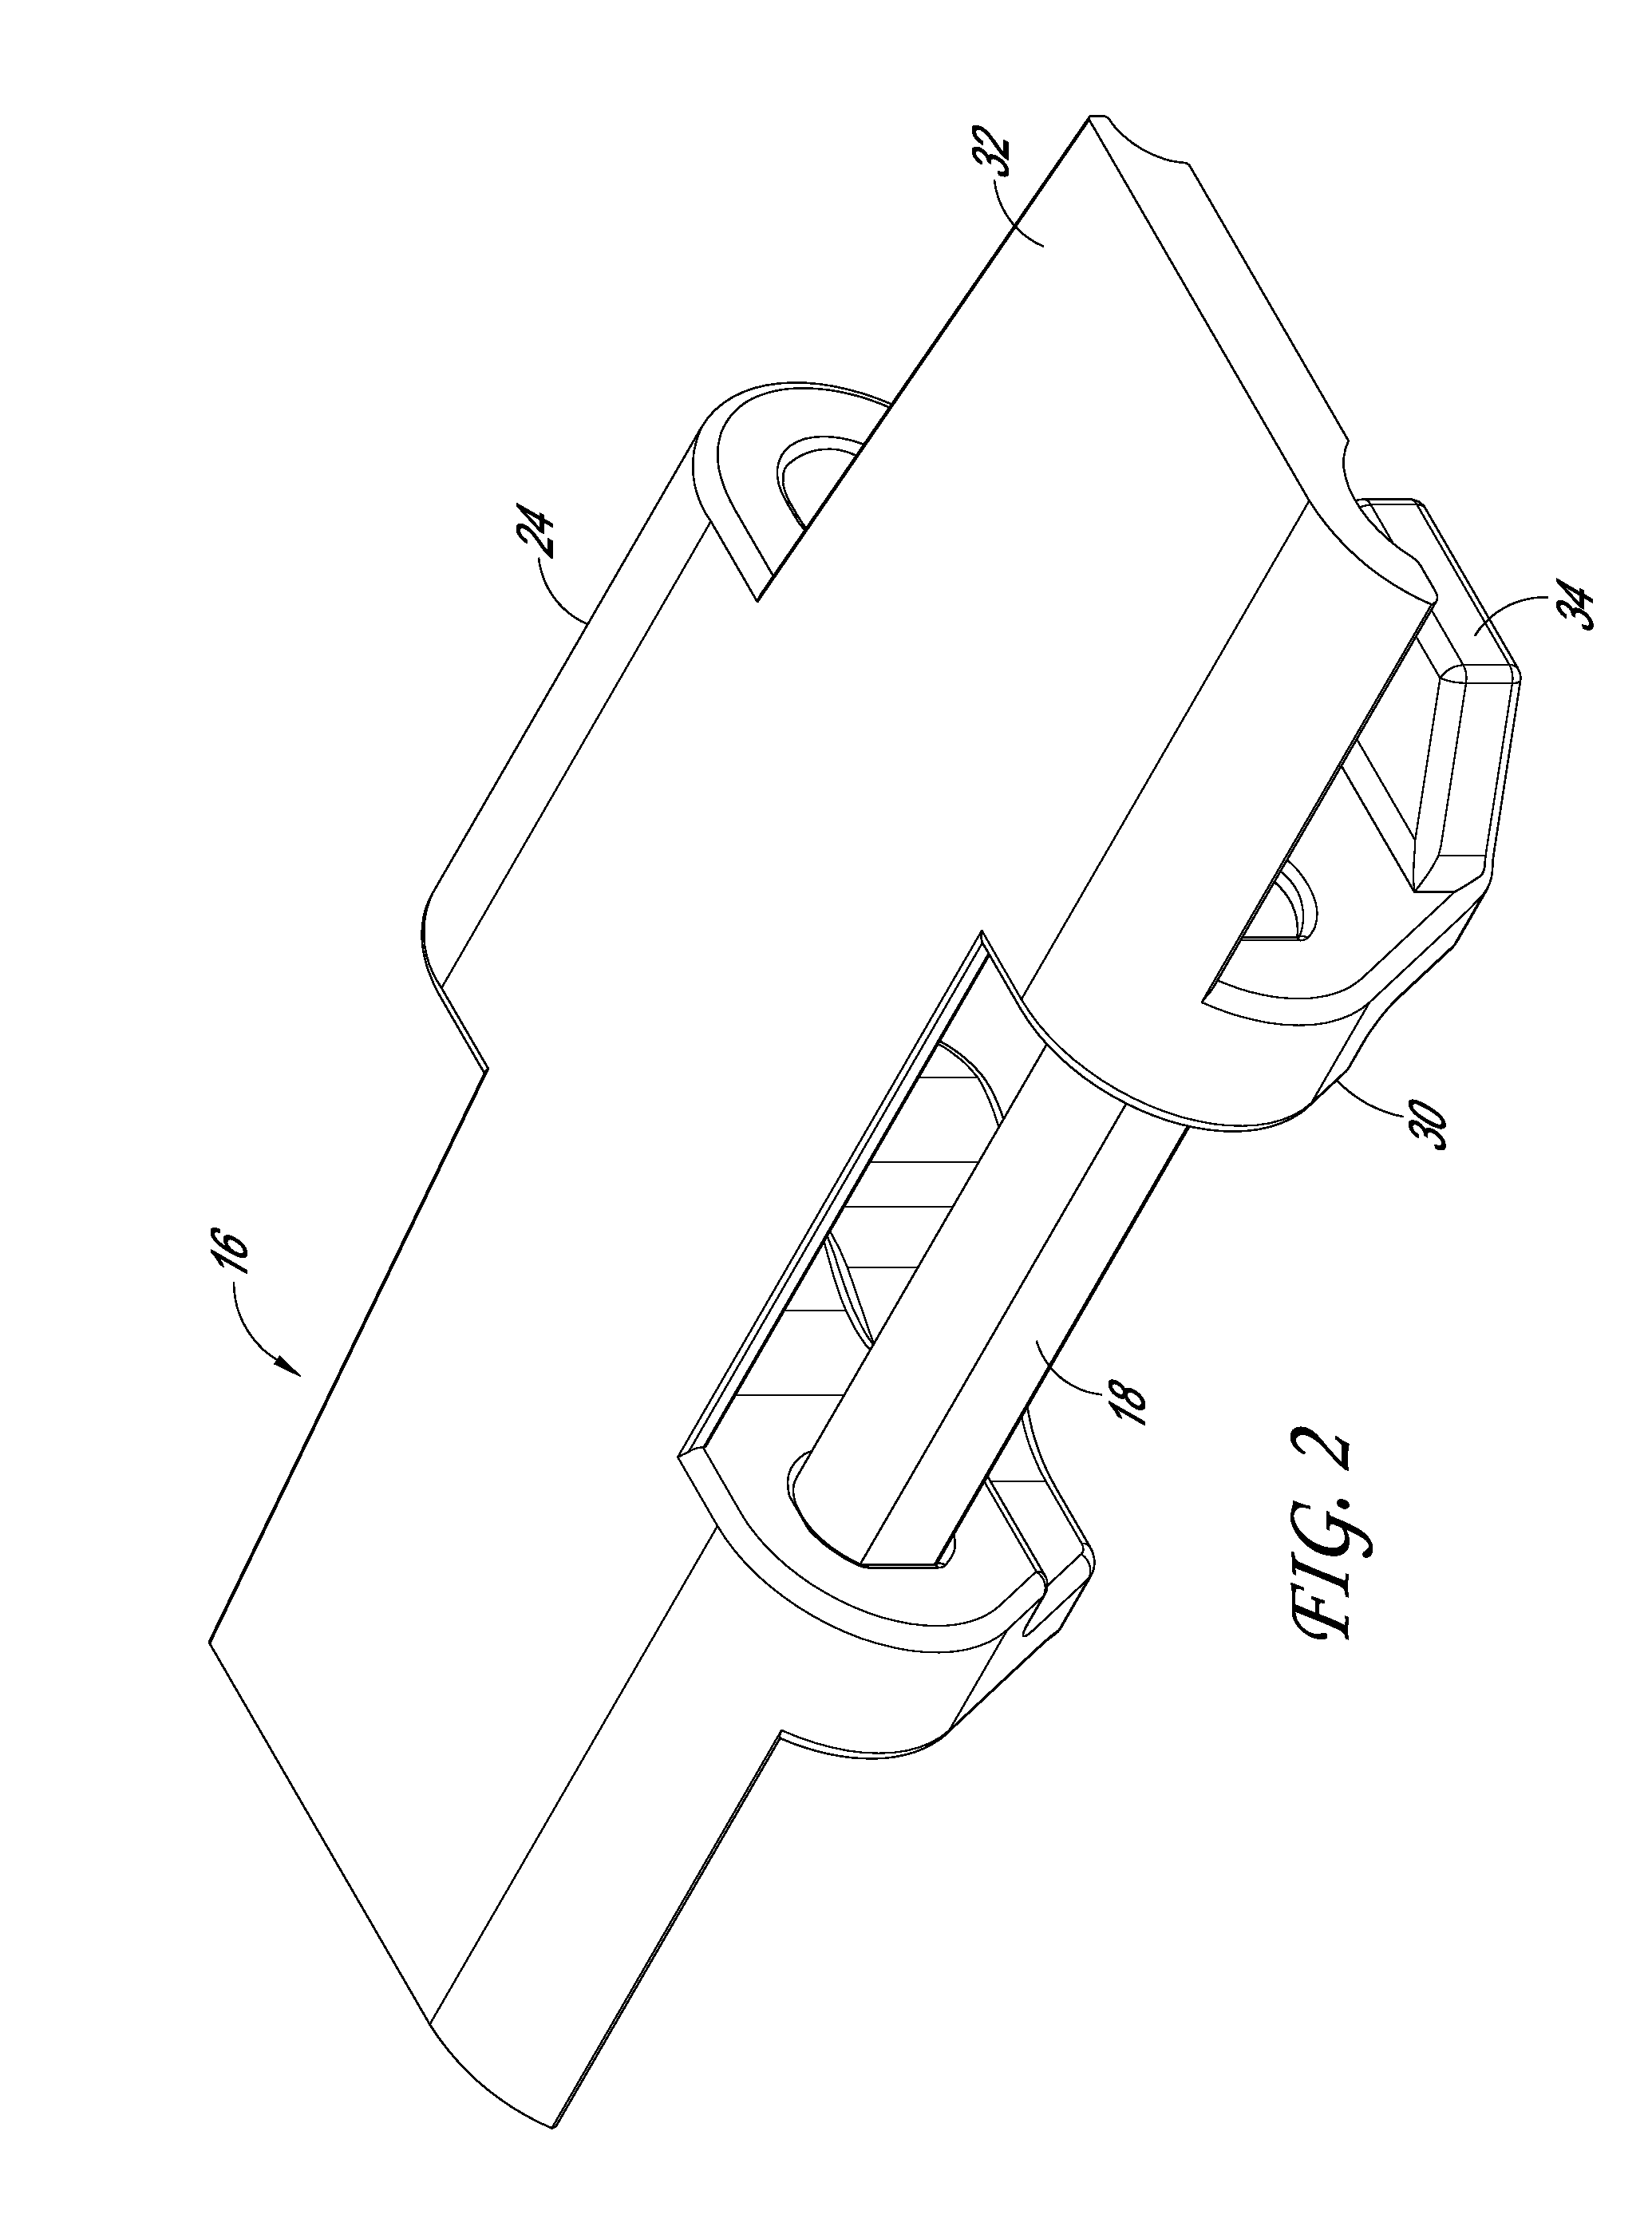 Conveyor system wear indication devices and methods